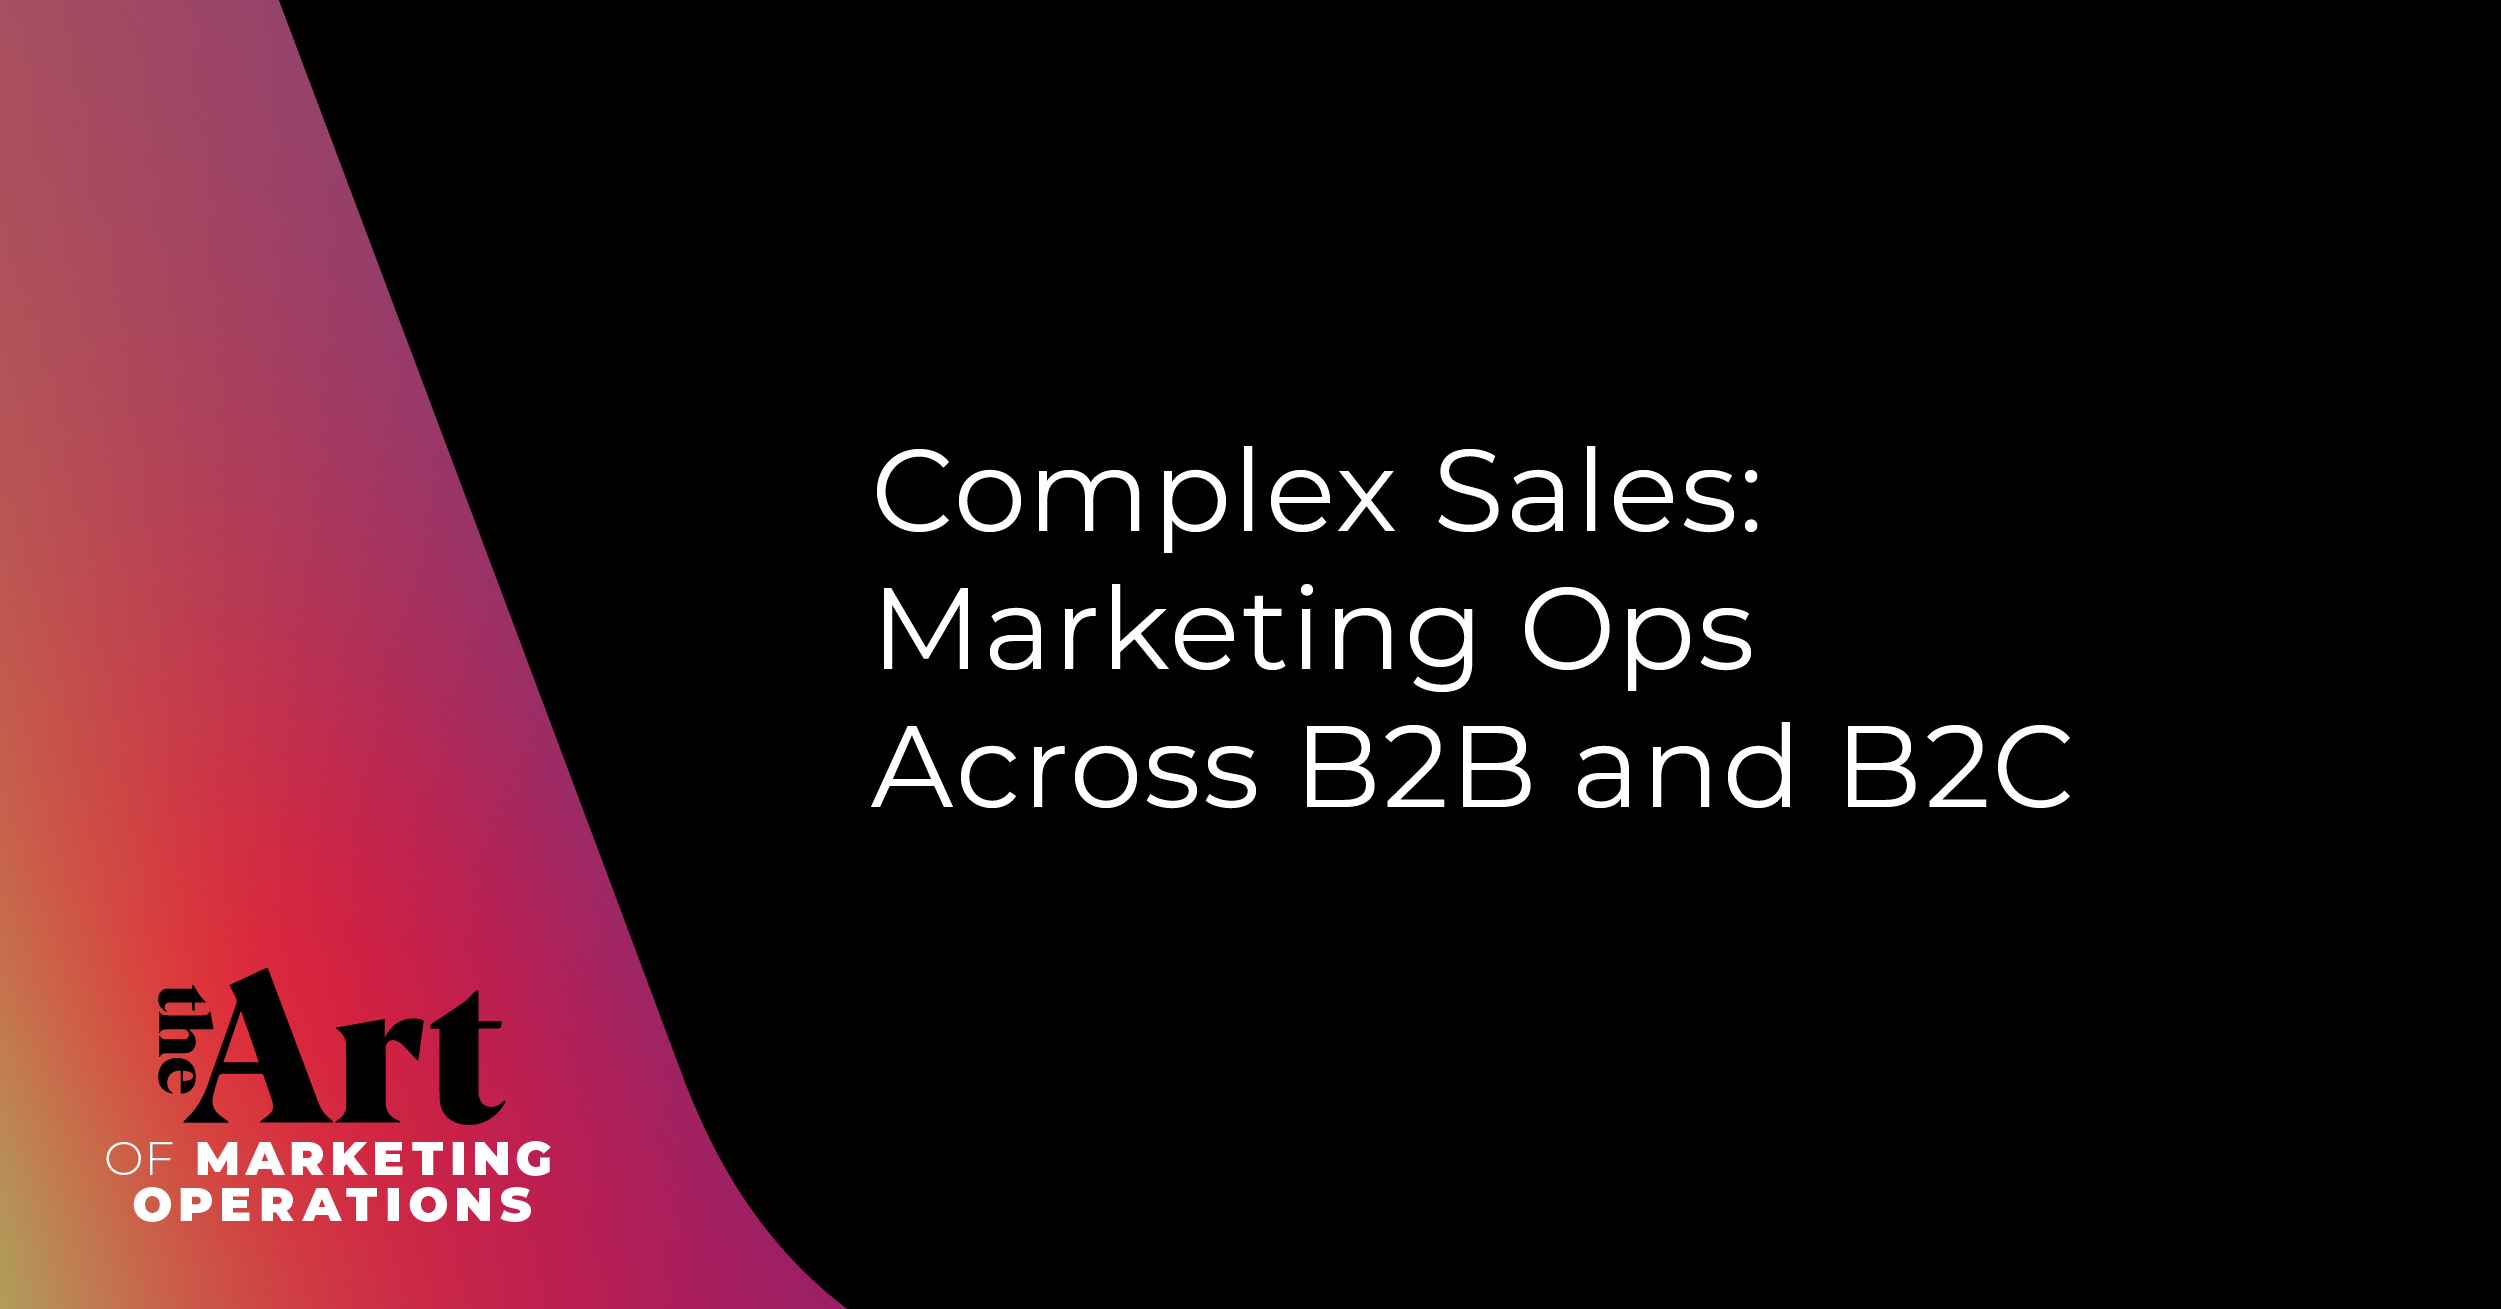 Featured image for article: Ep: 33 - Complex Sales: Marketing Ops Across B2B and B2C